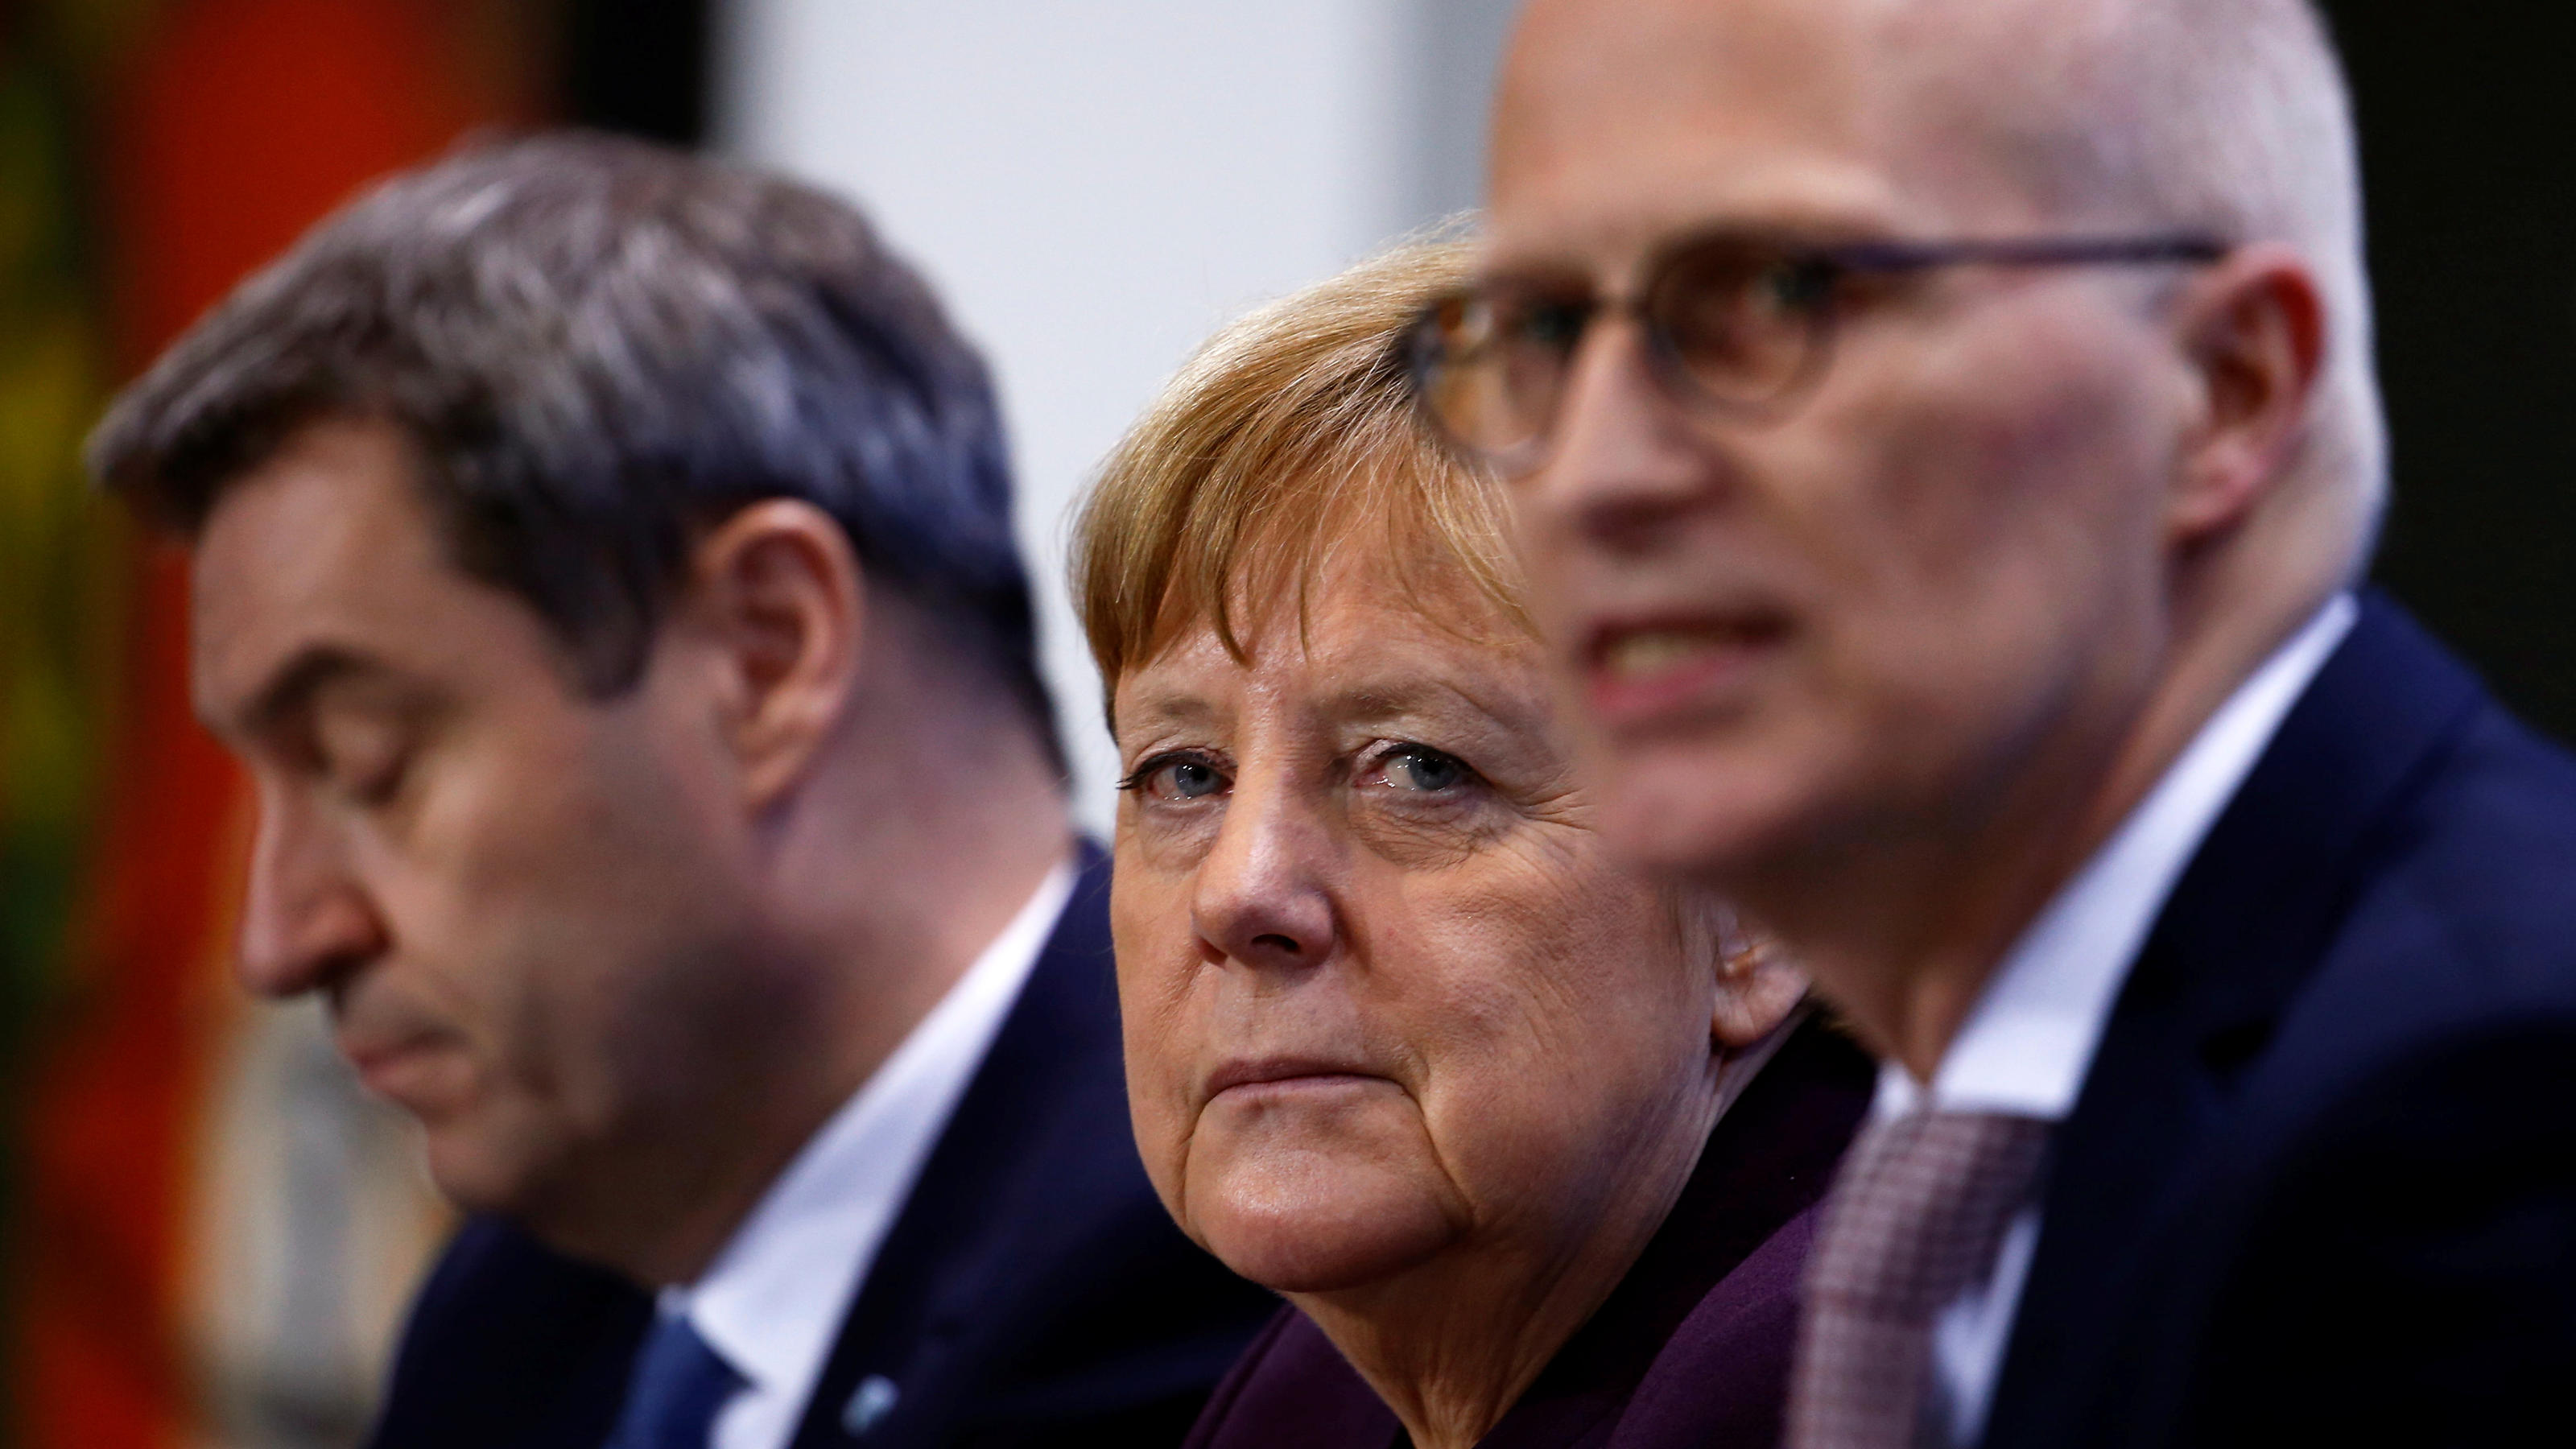 German Chancellor Angela Merkel, Bavarian State Premier Markus Soeder and Hamburg Mayor Peter Tschentsche attend a news conference after a meeting with federal state leaders at the Chancellery in Berlin, Germany March 12, 2020. REUTERS/Michele Tantus